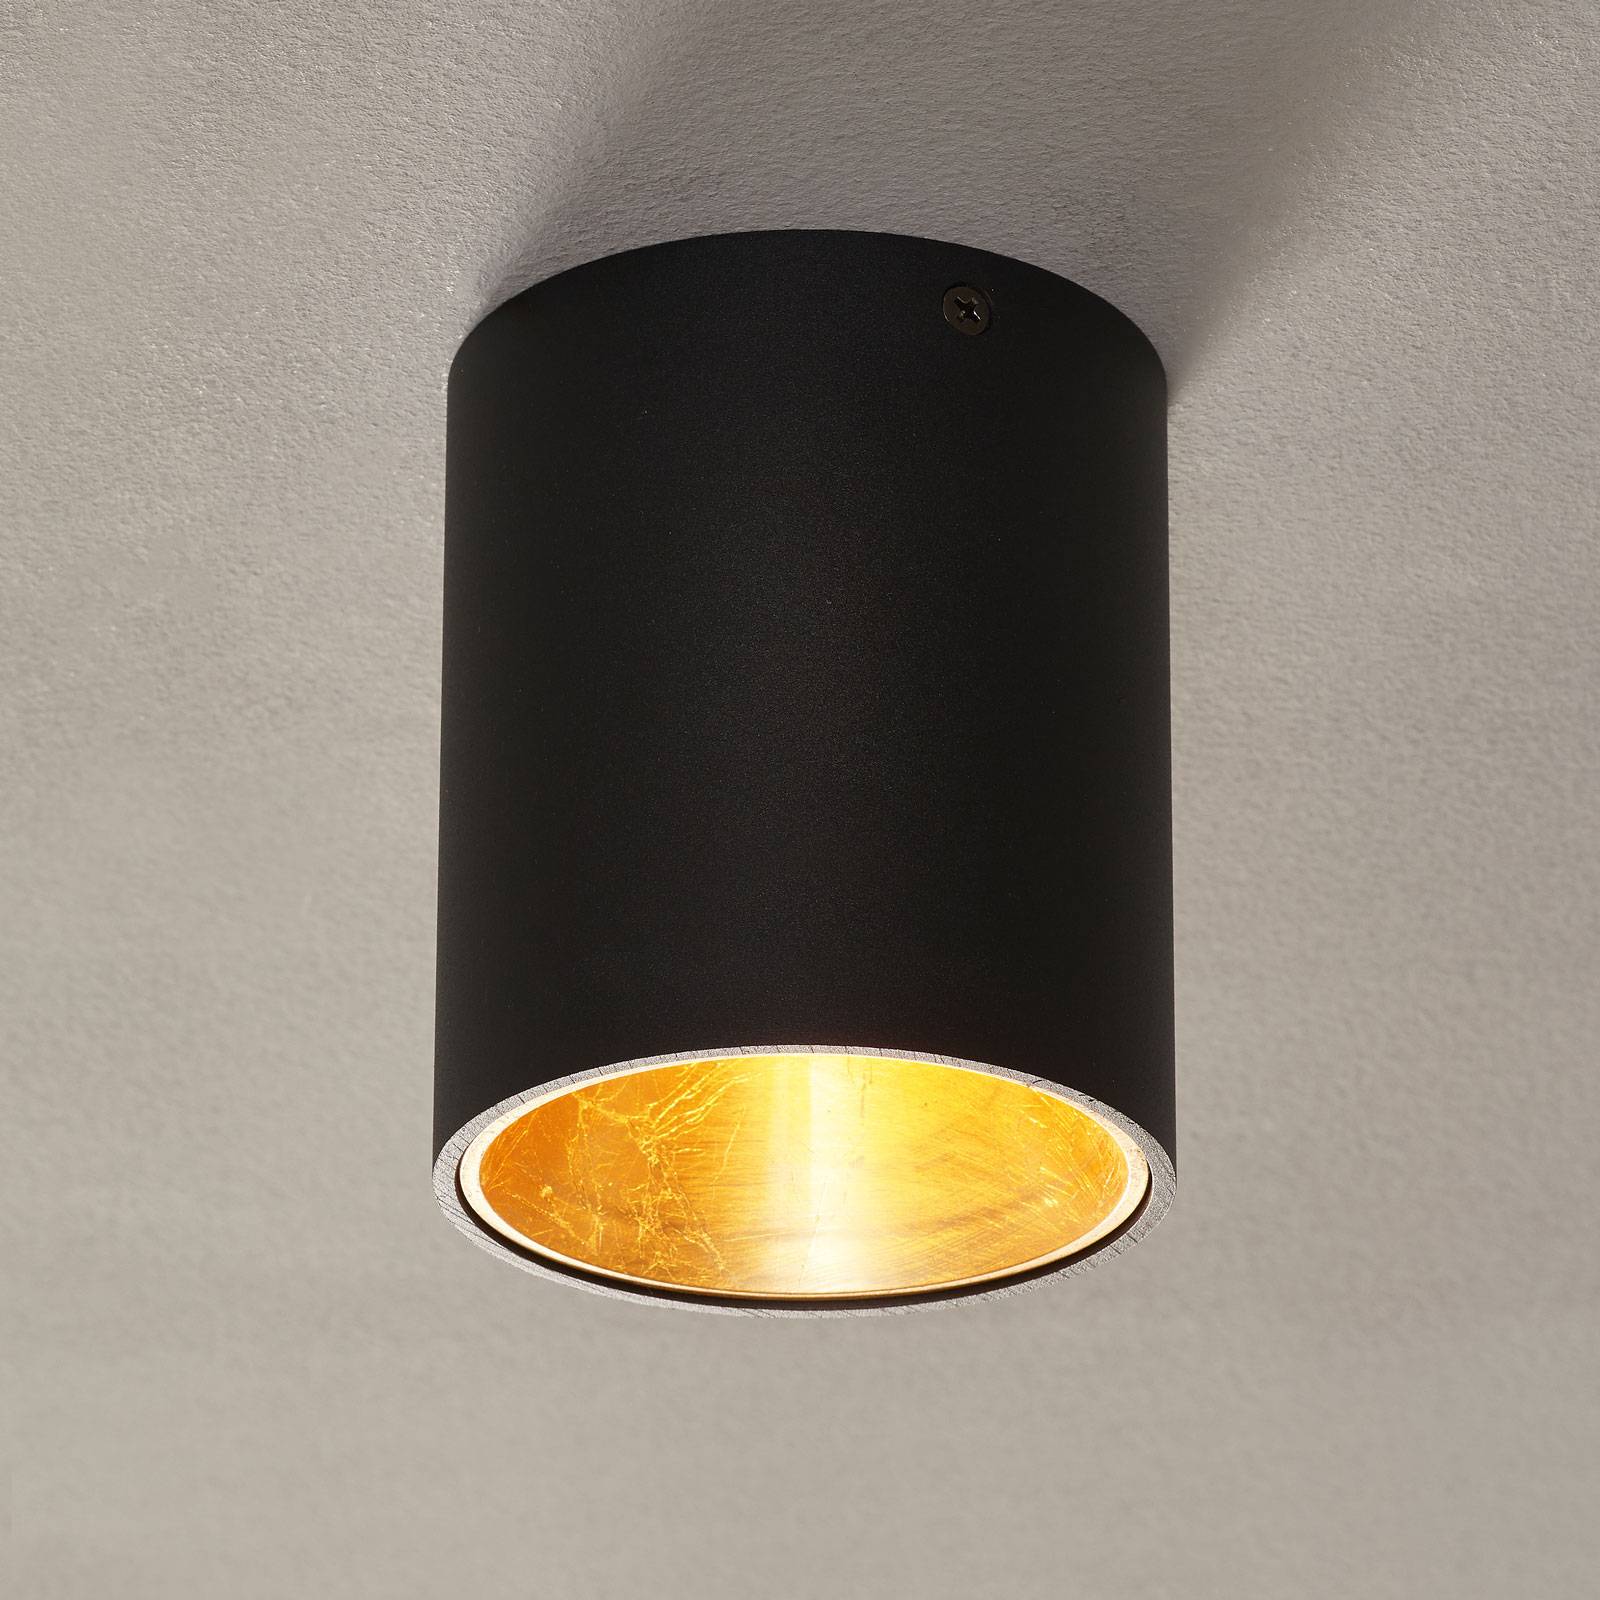 Polasso LED ceiling lamp round, black and gold